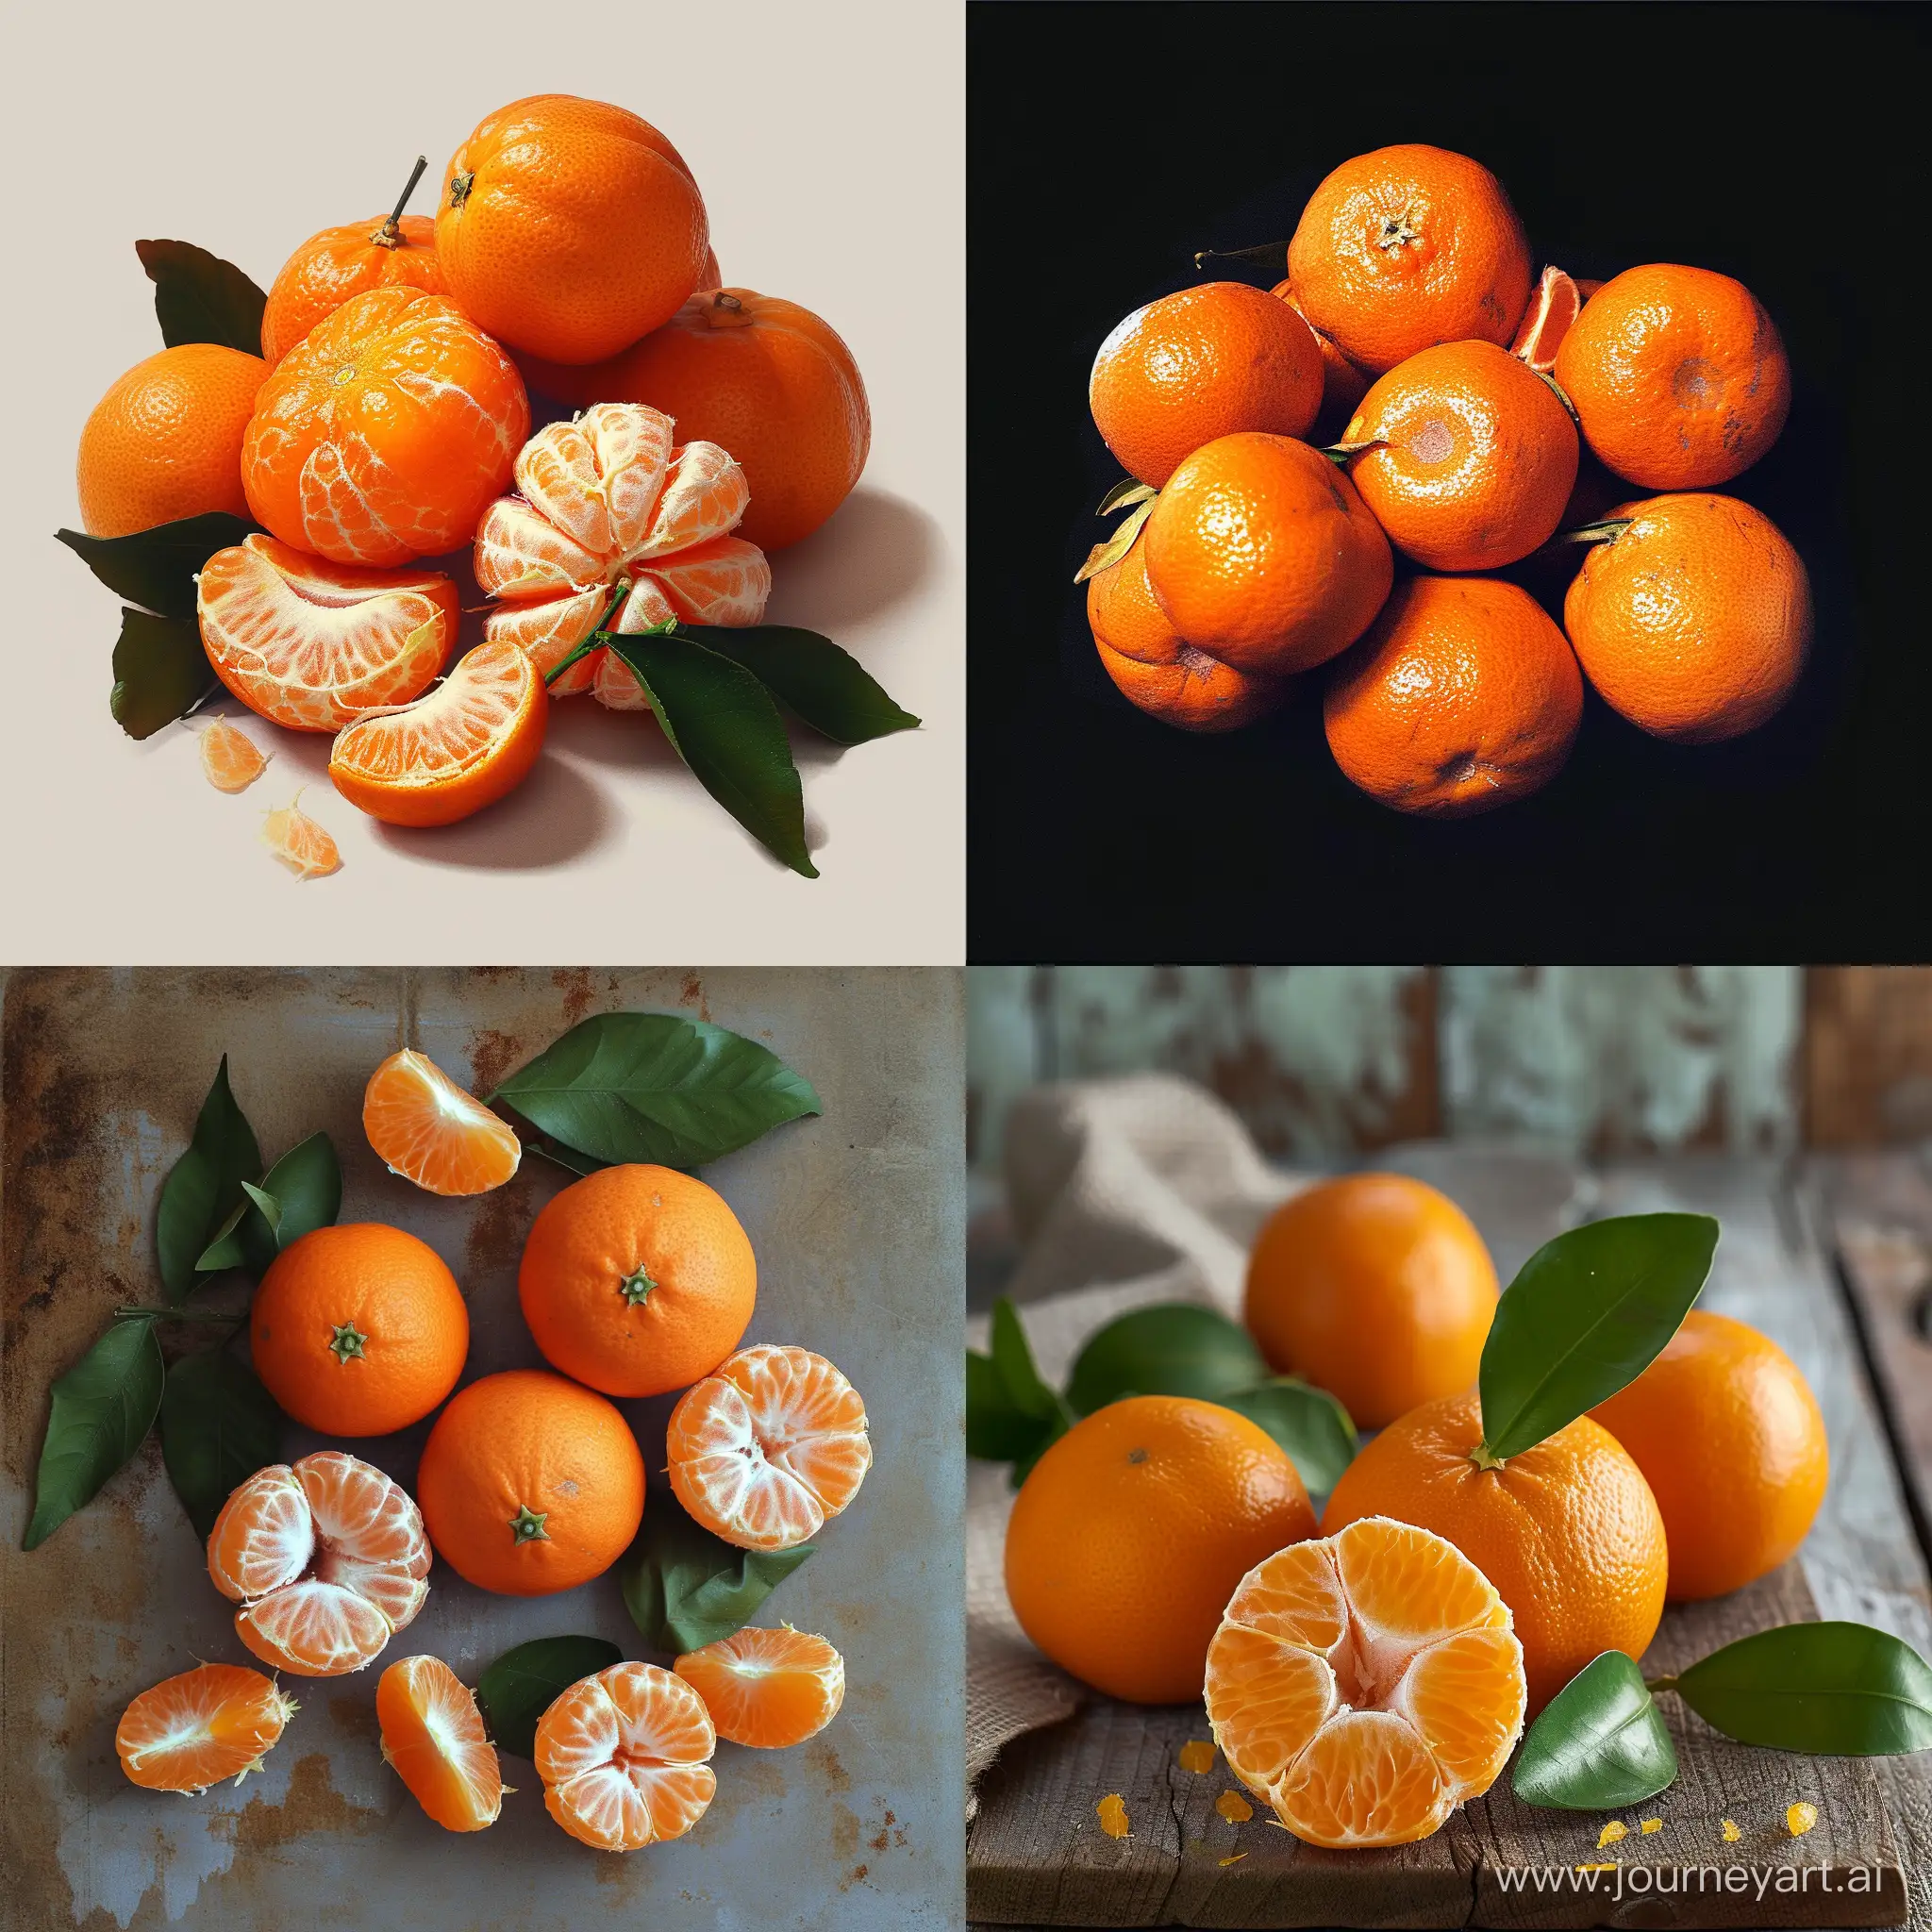 Vibrant-Tangerines-Arranged-in-Realistic-Photo-Composition